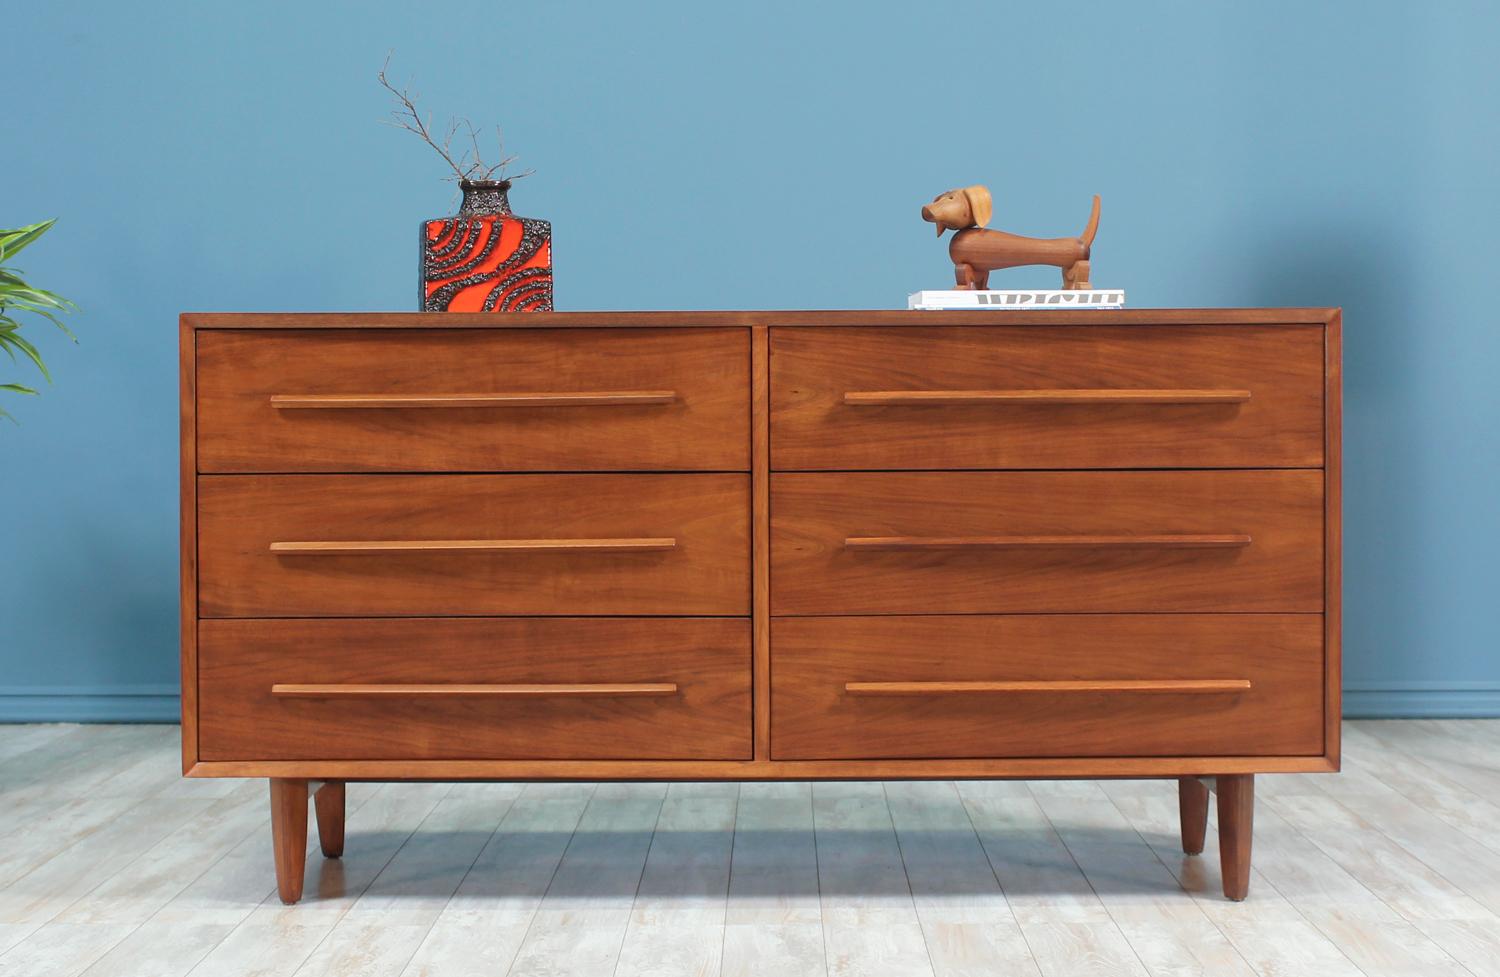 Dresser designed by T.H. Robsjohn-Gibbings and manufactured by Widdicomb in the United States circa 1950’s. This design features a walnut wood body that sits on four tapered legs. The front, including the drawers, is concaved giving this dresser a